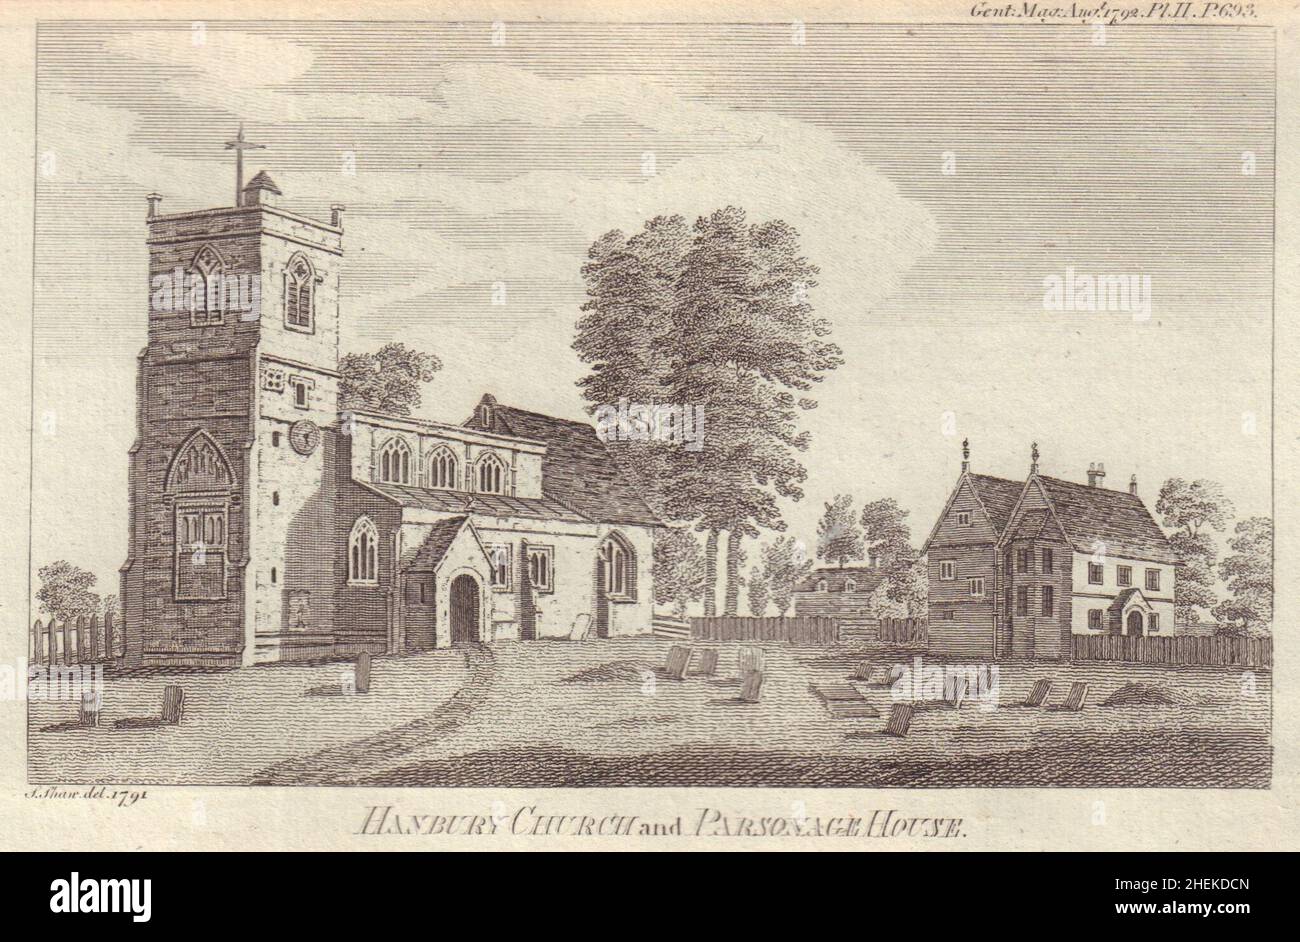 View of the Hanbury Church and parsonage house, Staffordshire 1792 old print Stock Photo